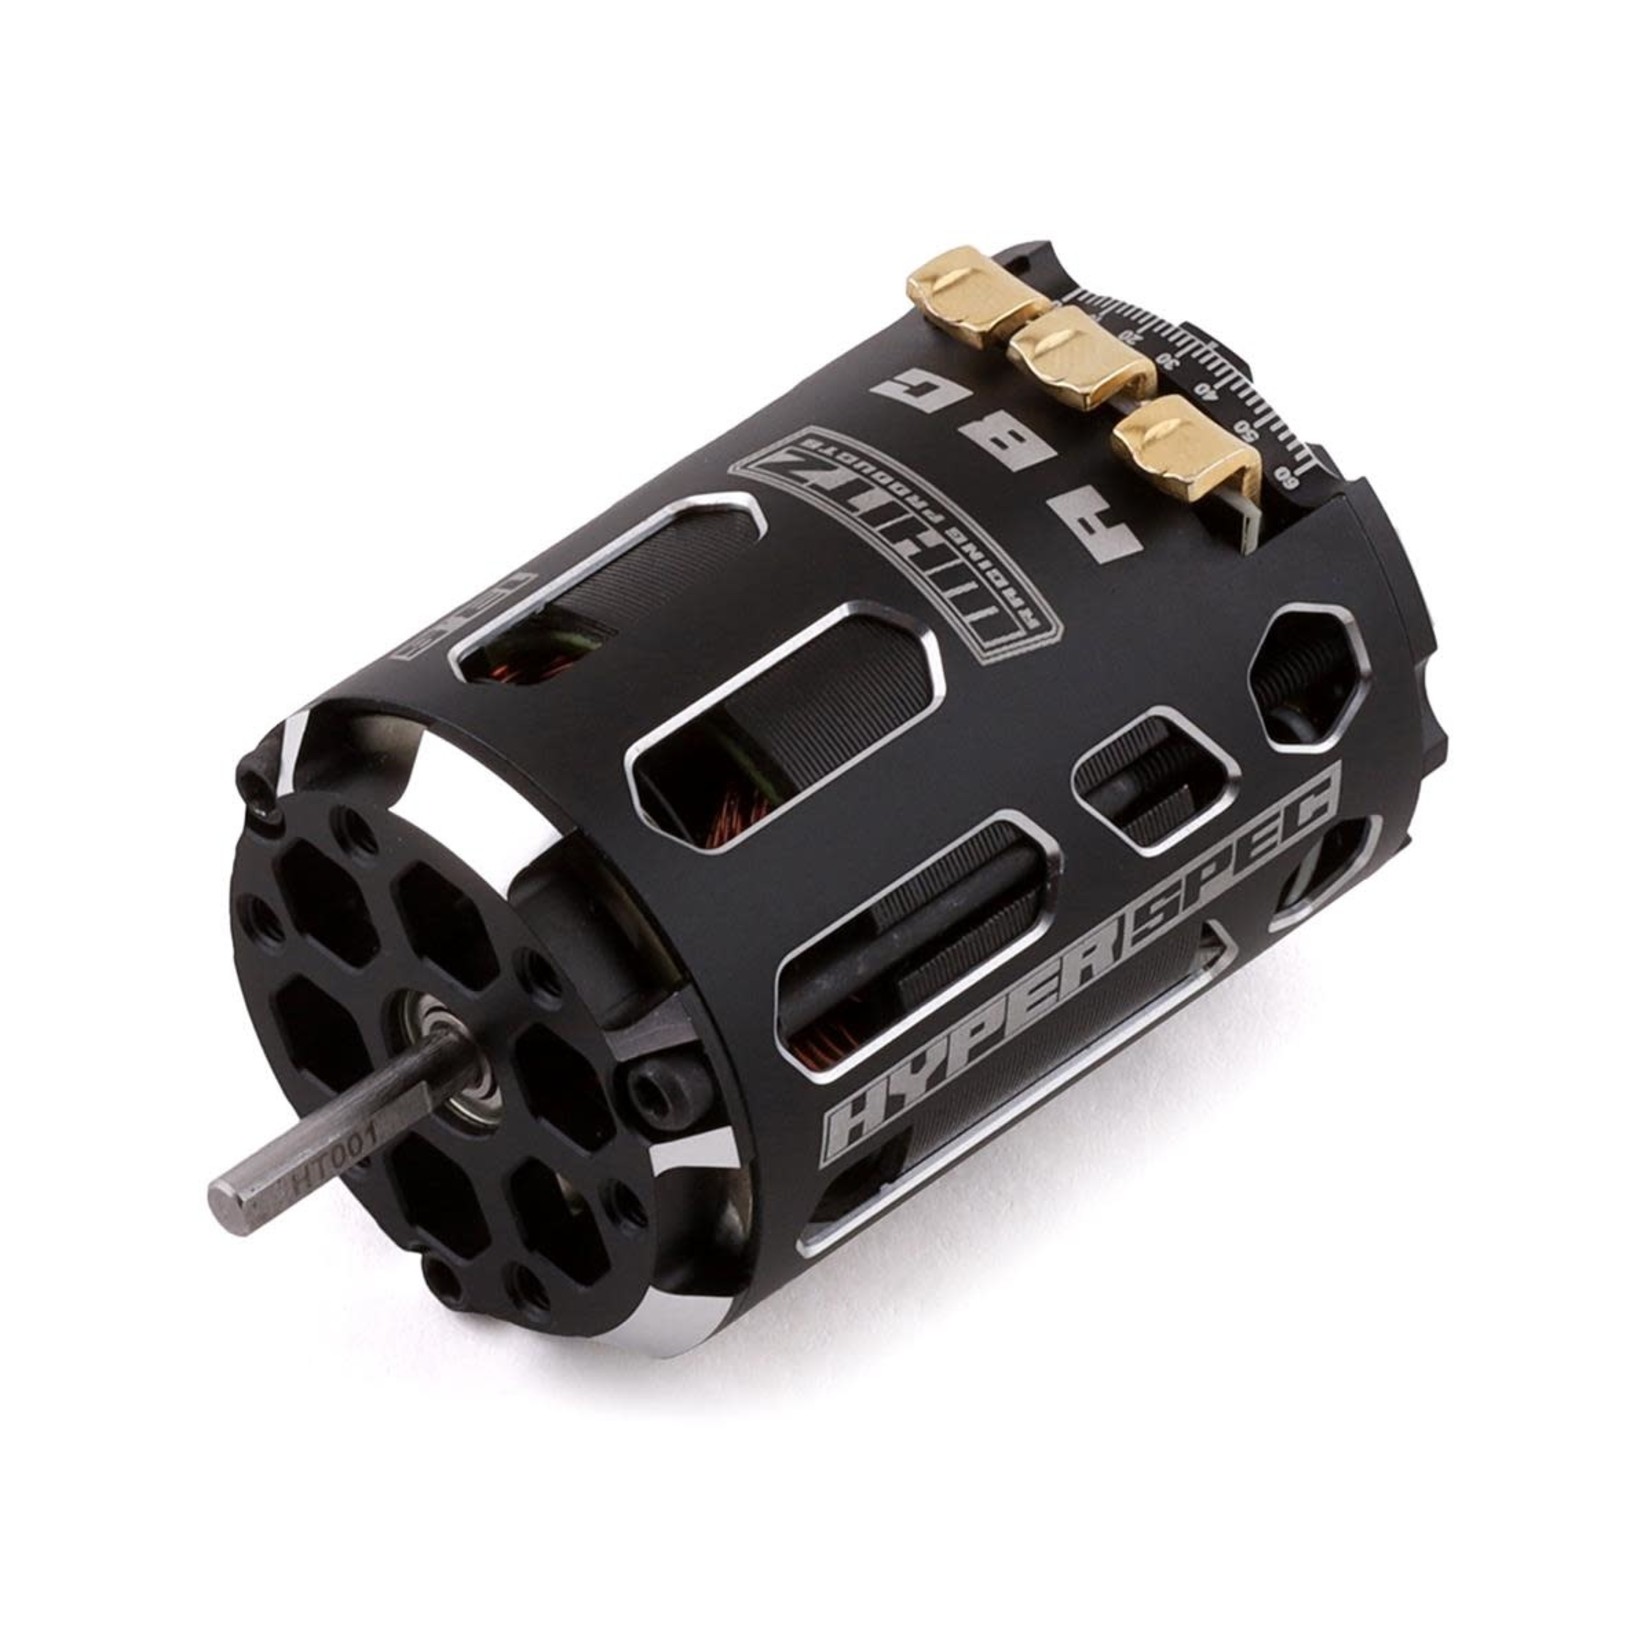 Whitz Racing Products Whitz Racing Products HyperSpec Competition Stock Sensored Brushless Motor (17.5T) #WRP-HM-175